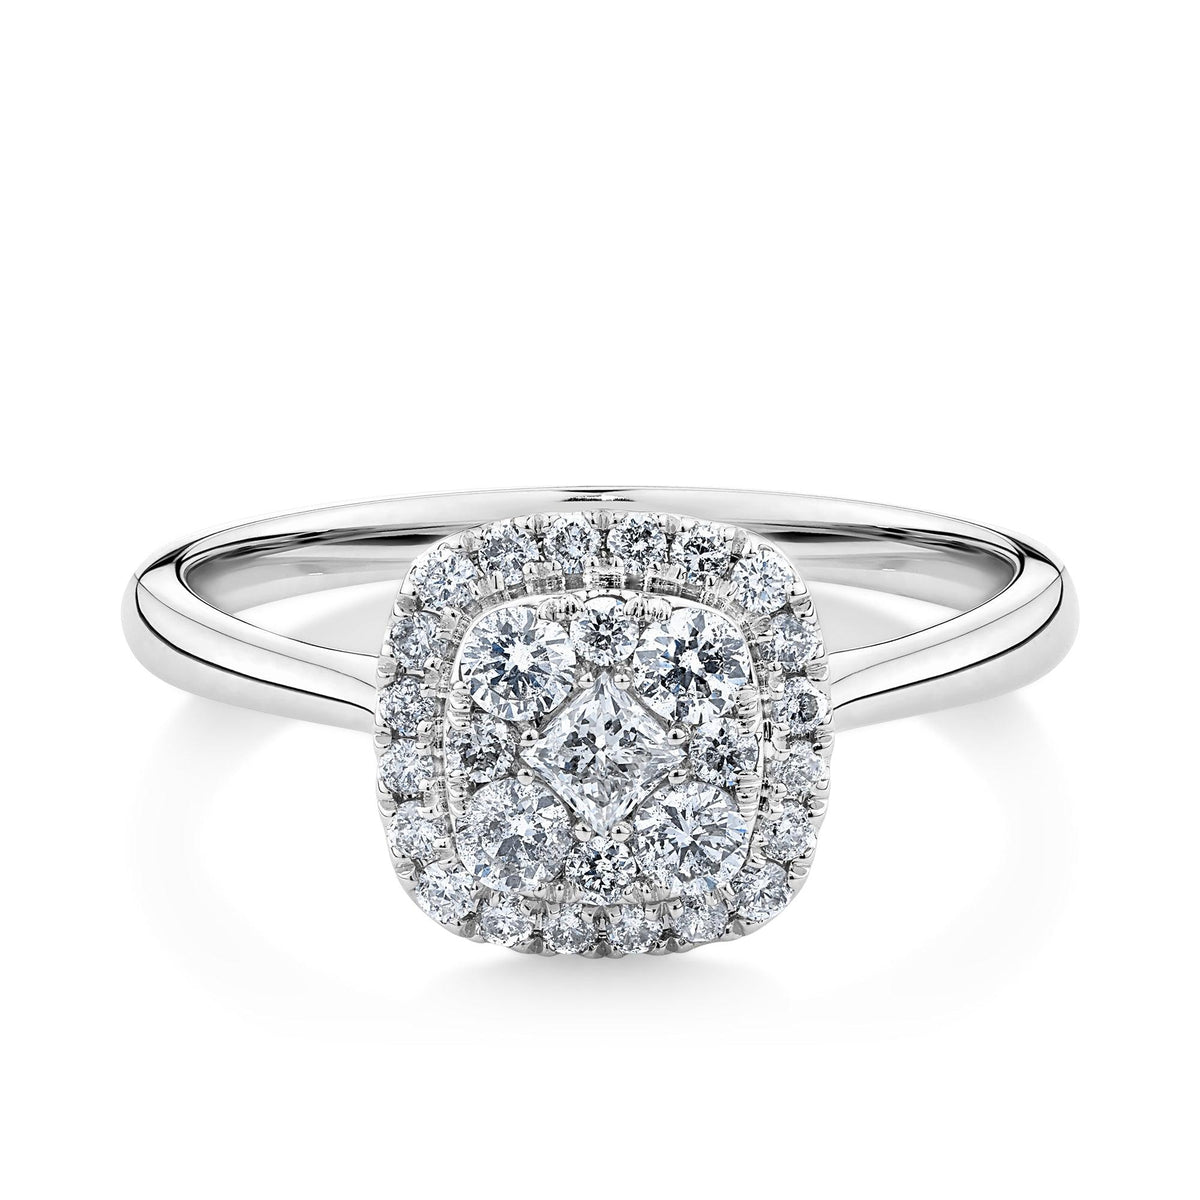 0.50ct TDW Diamond Square Halo Engagement Ring in 9ct White Gold - Wallace Bishop